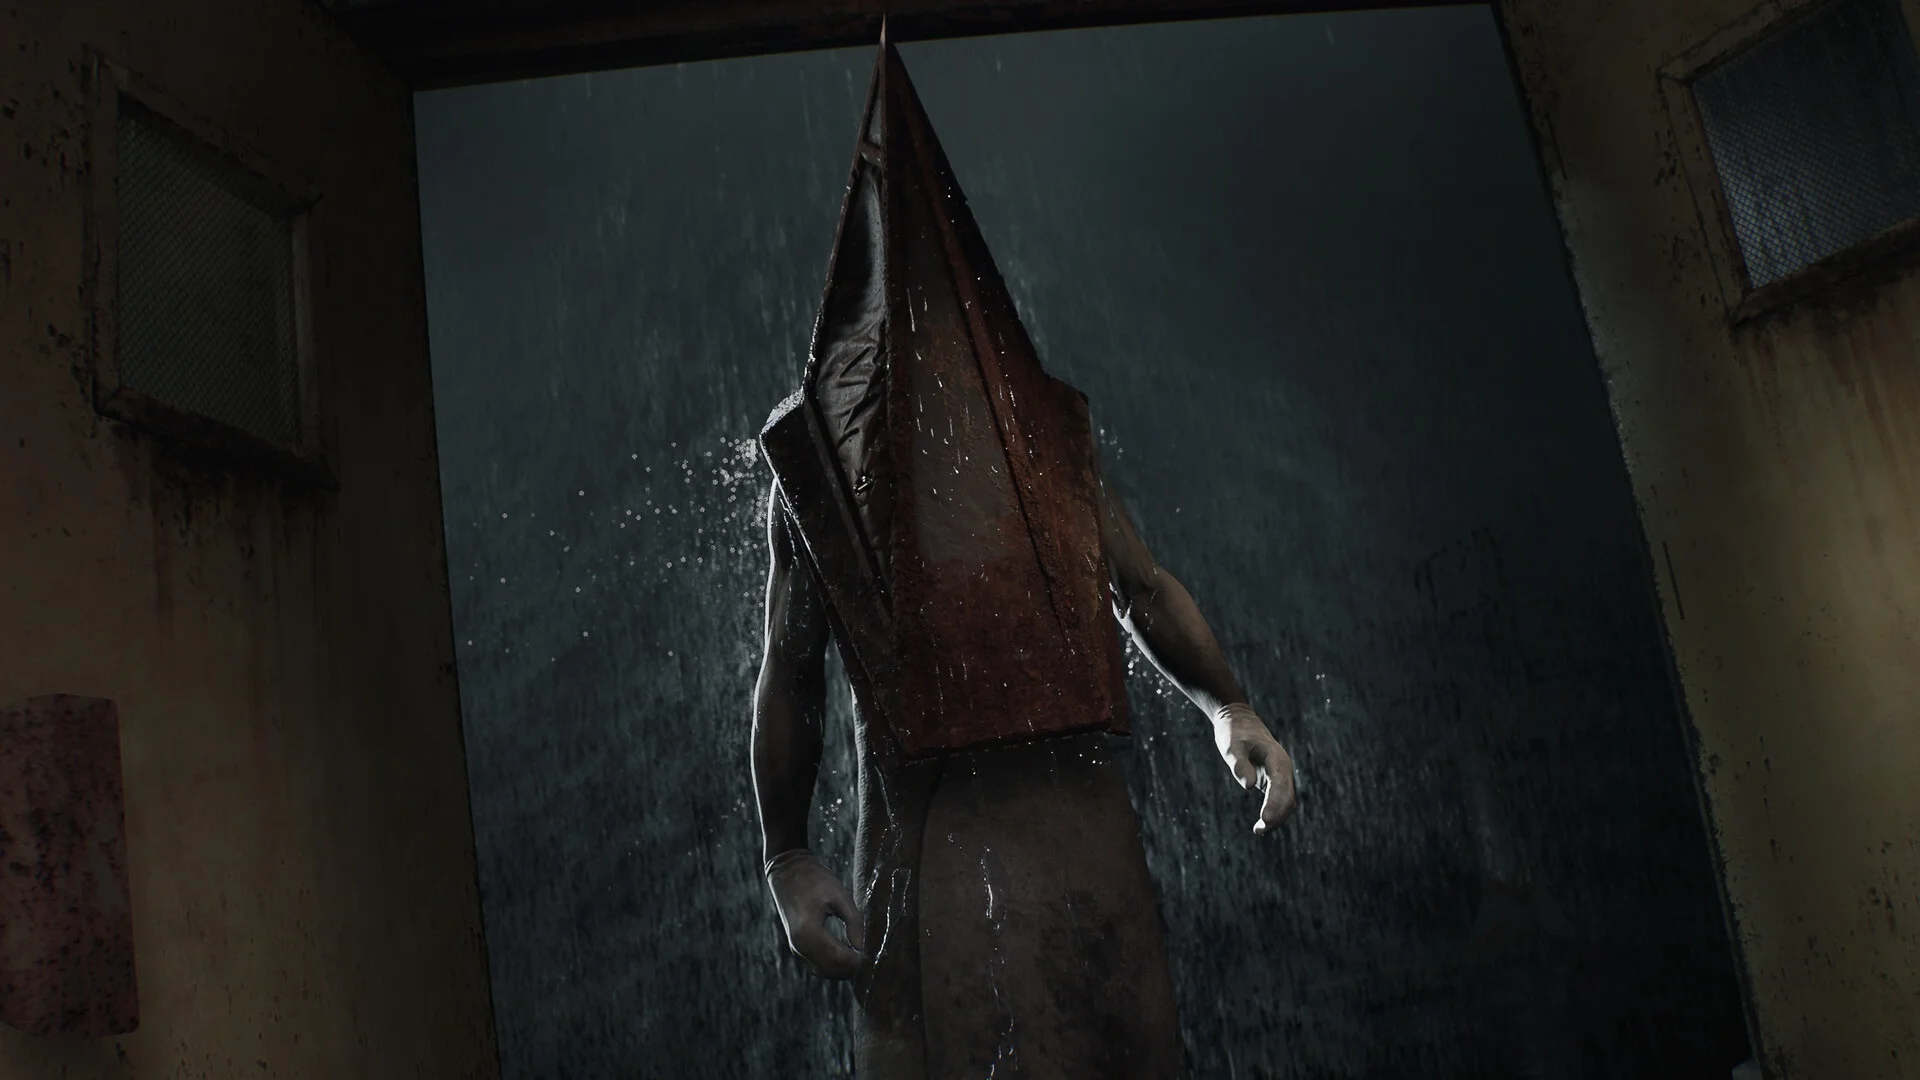 Exciting Peek at Silent Hill 2 Remake: Next Month's State of Play to Showcase New Gameplay